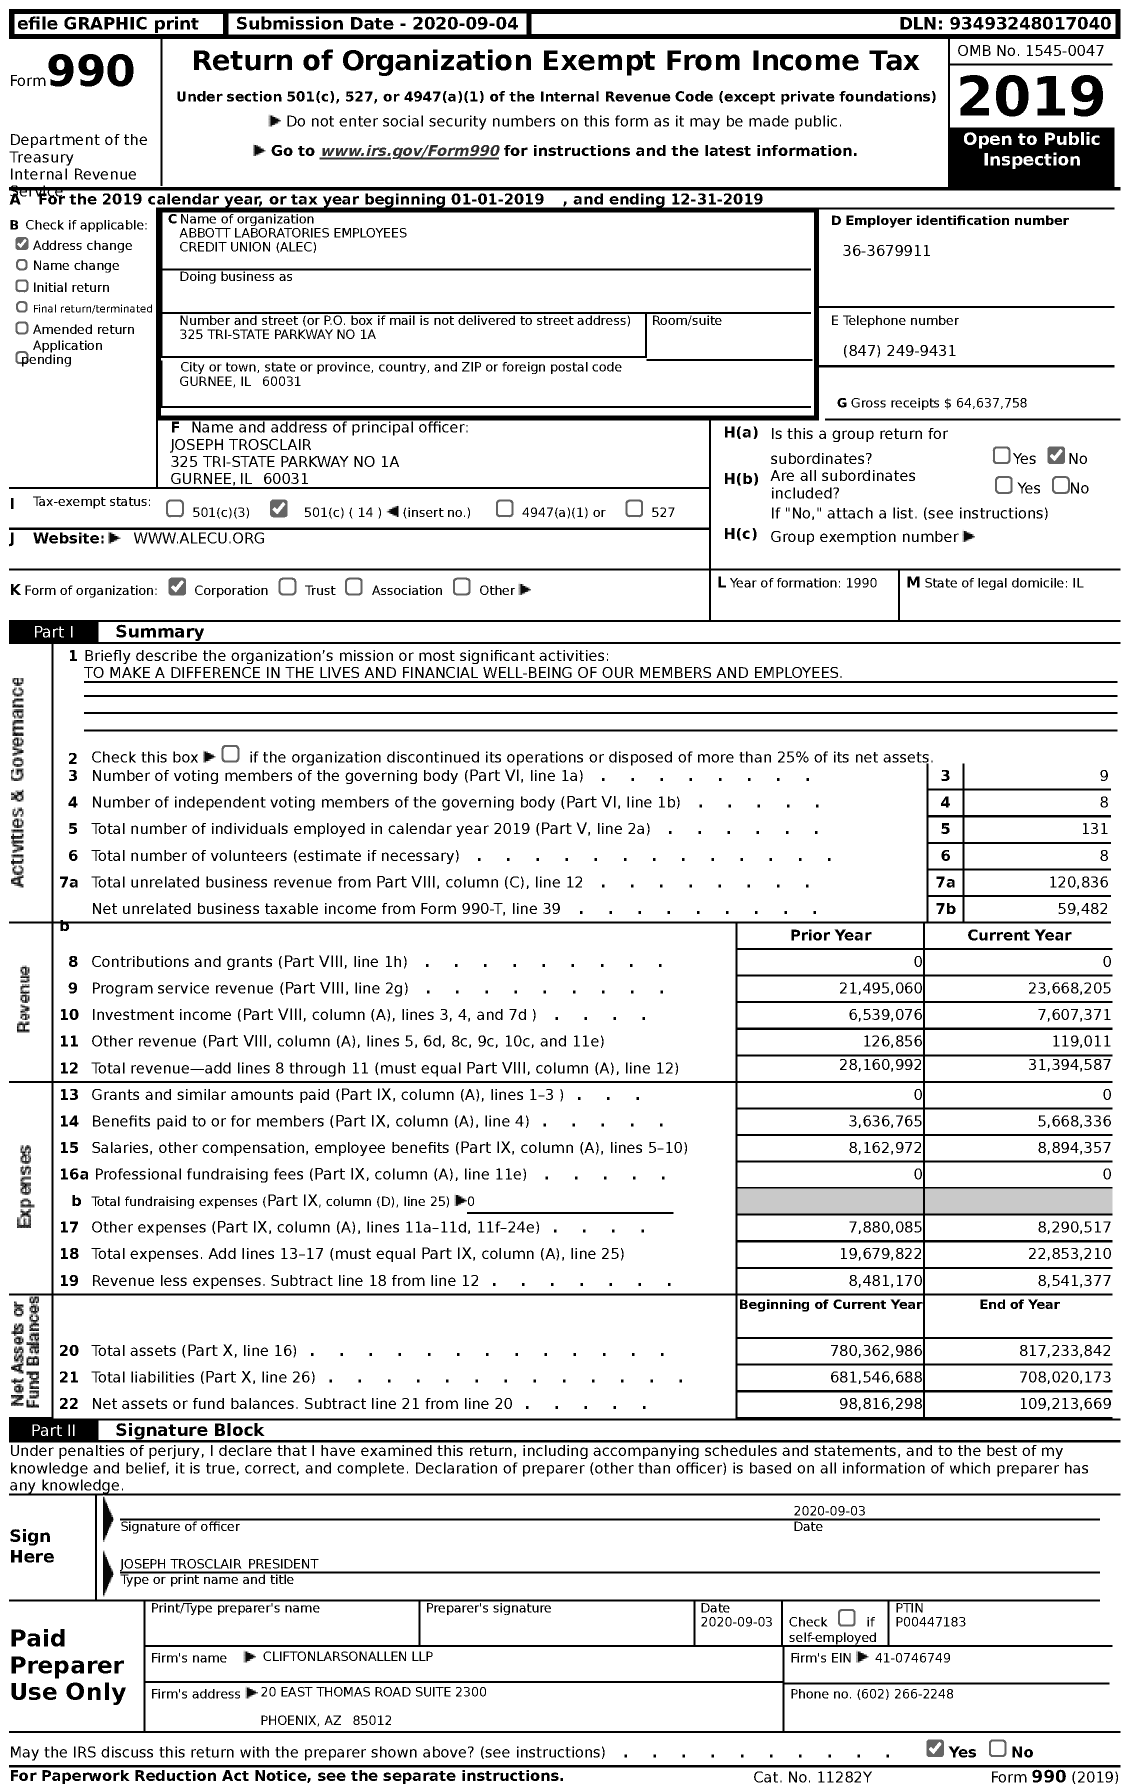 Image of first page of 2019 Form 990 for Abbott Laboratories Employees Credit Union (ALEC)